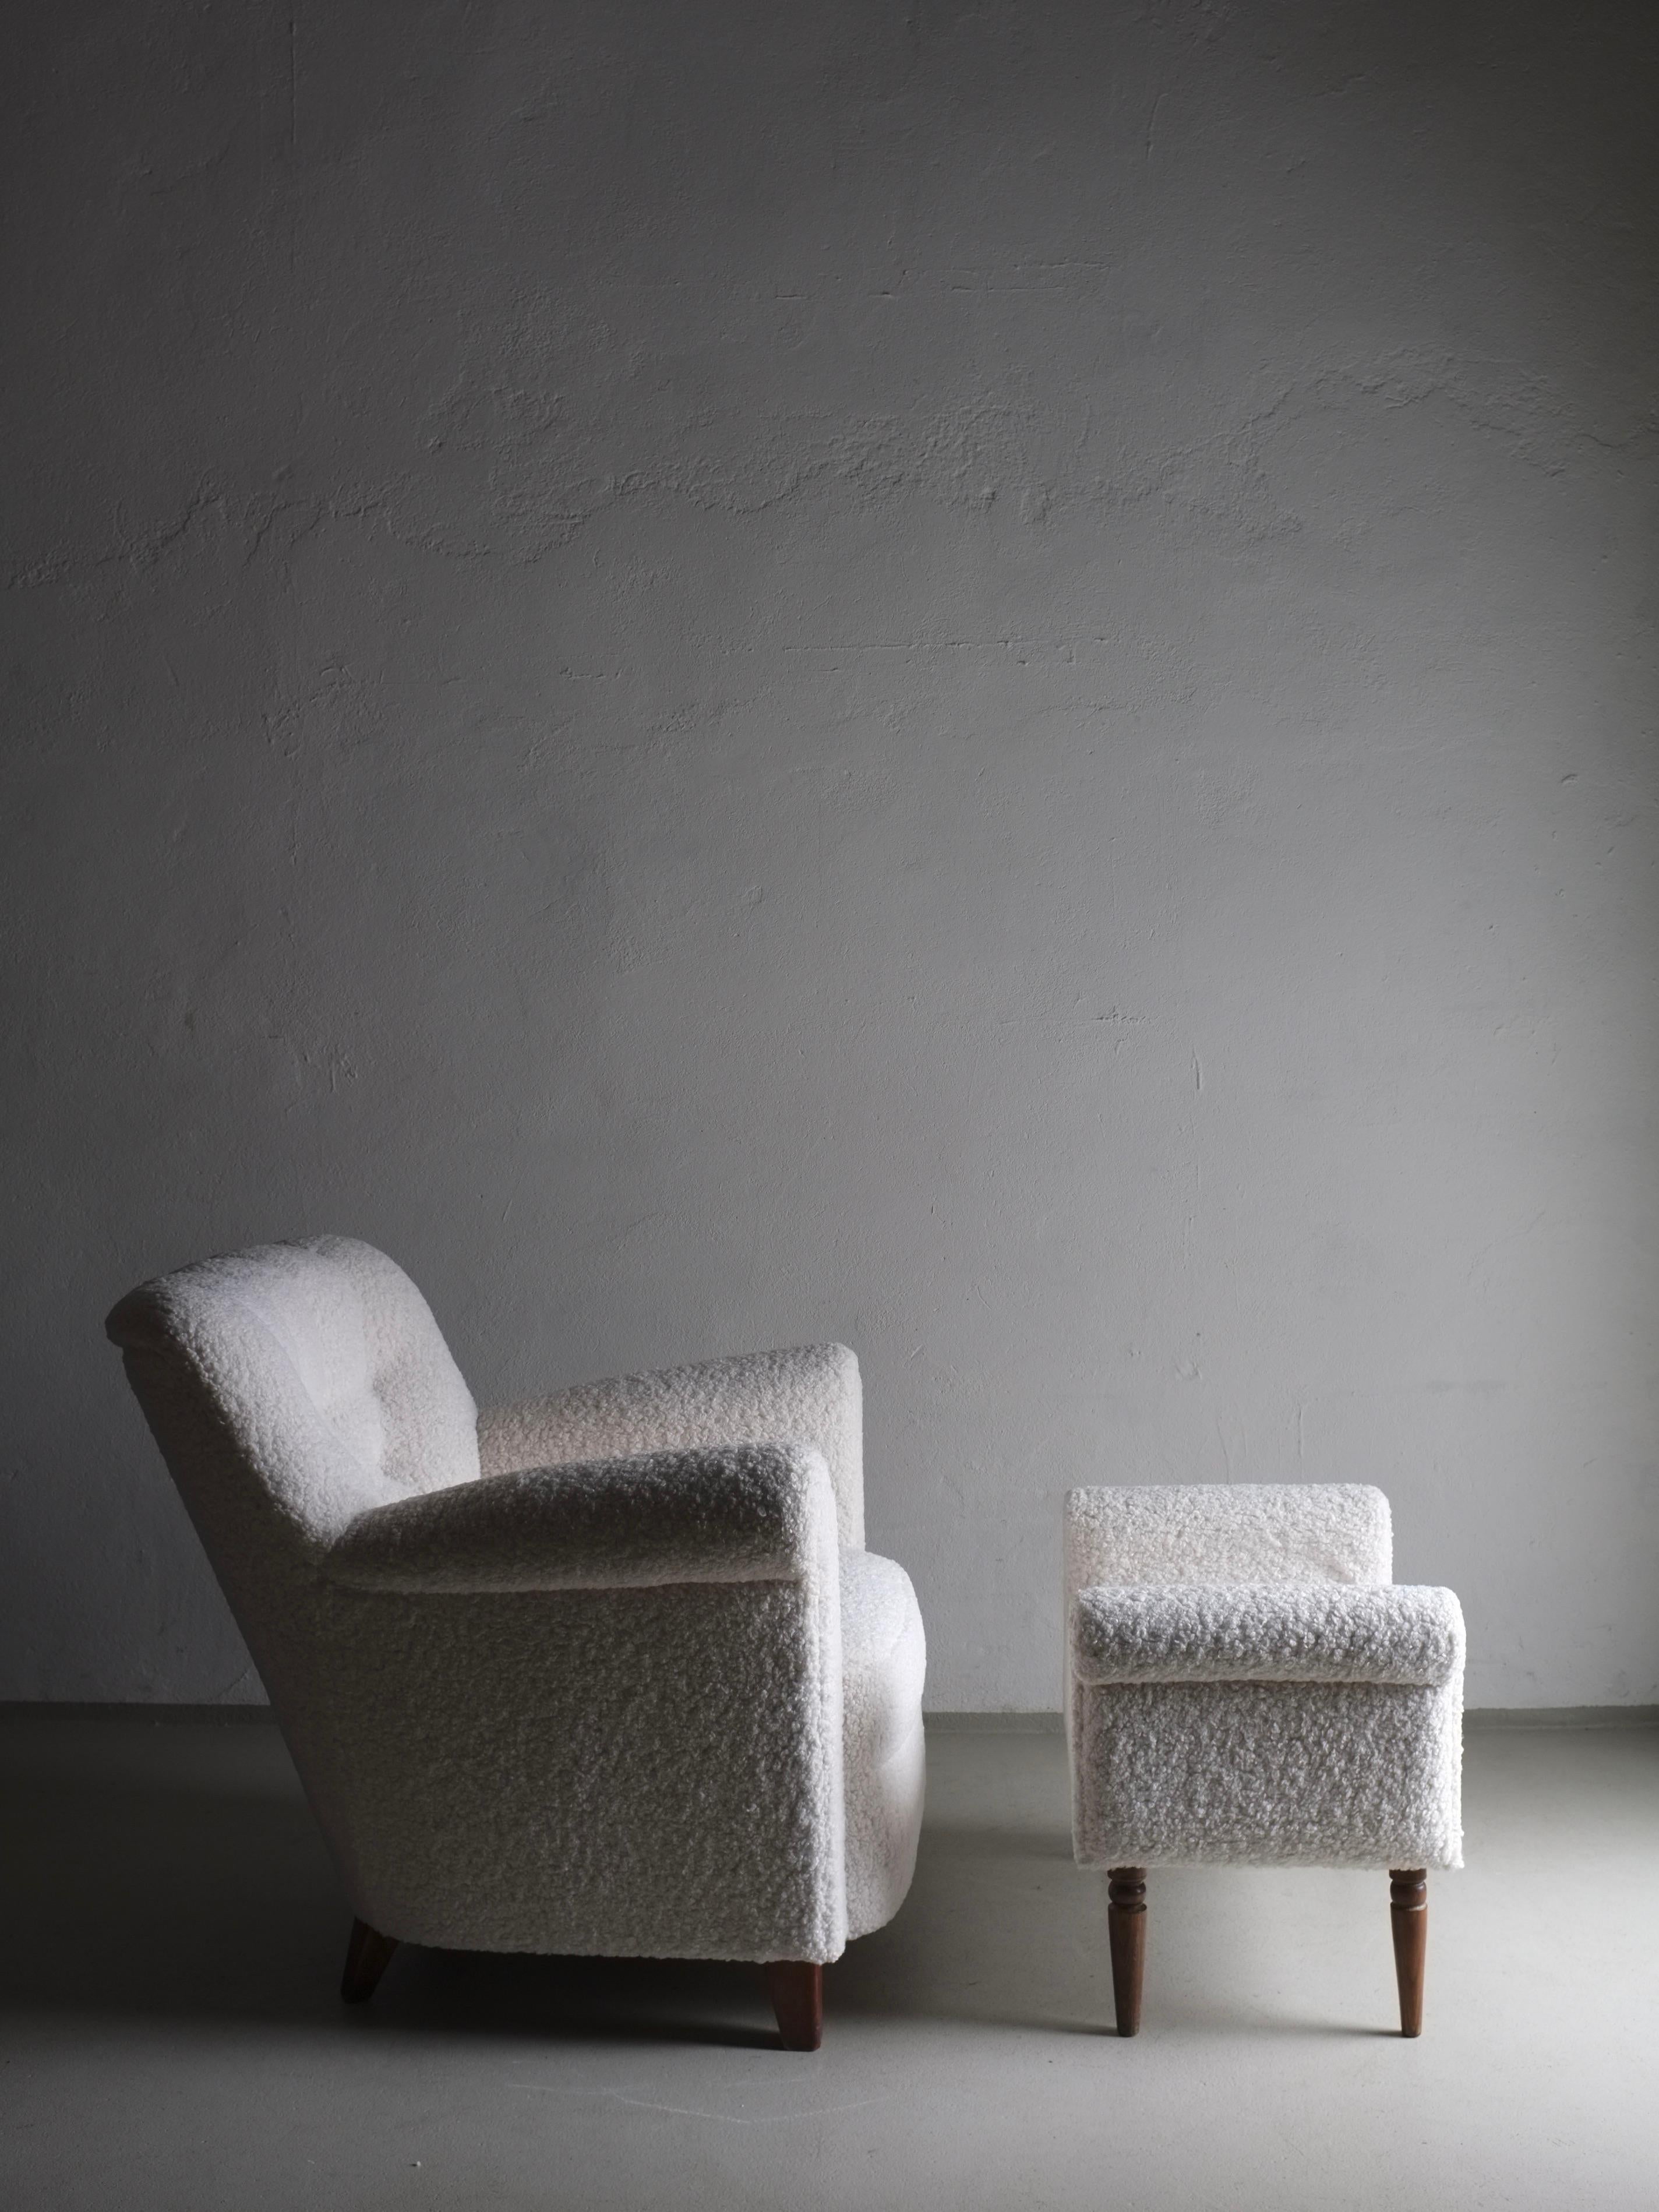 White Faux Shearling Lounge Chair, Sweden 1940s For Sale 2